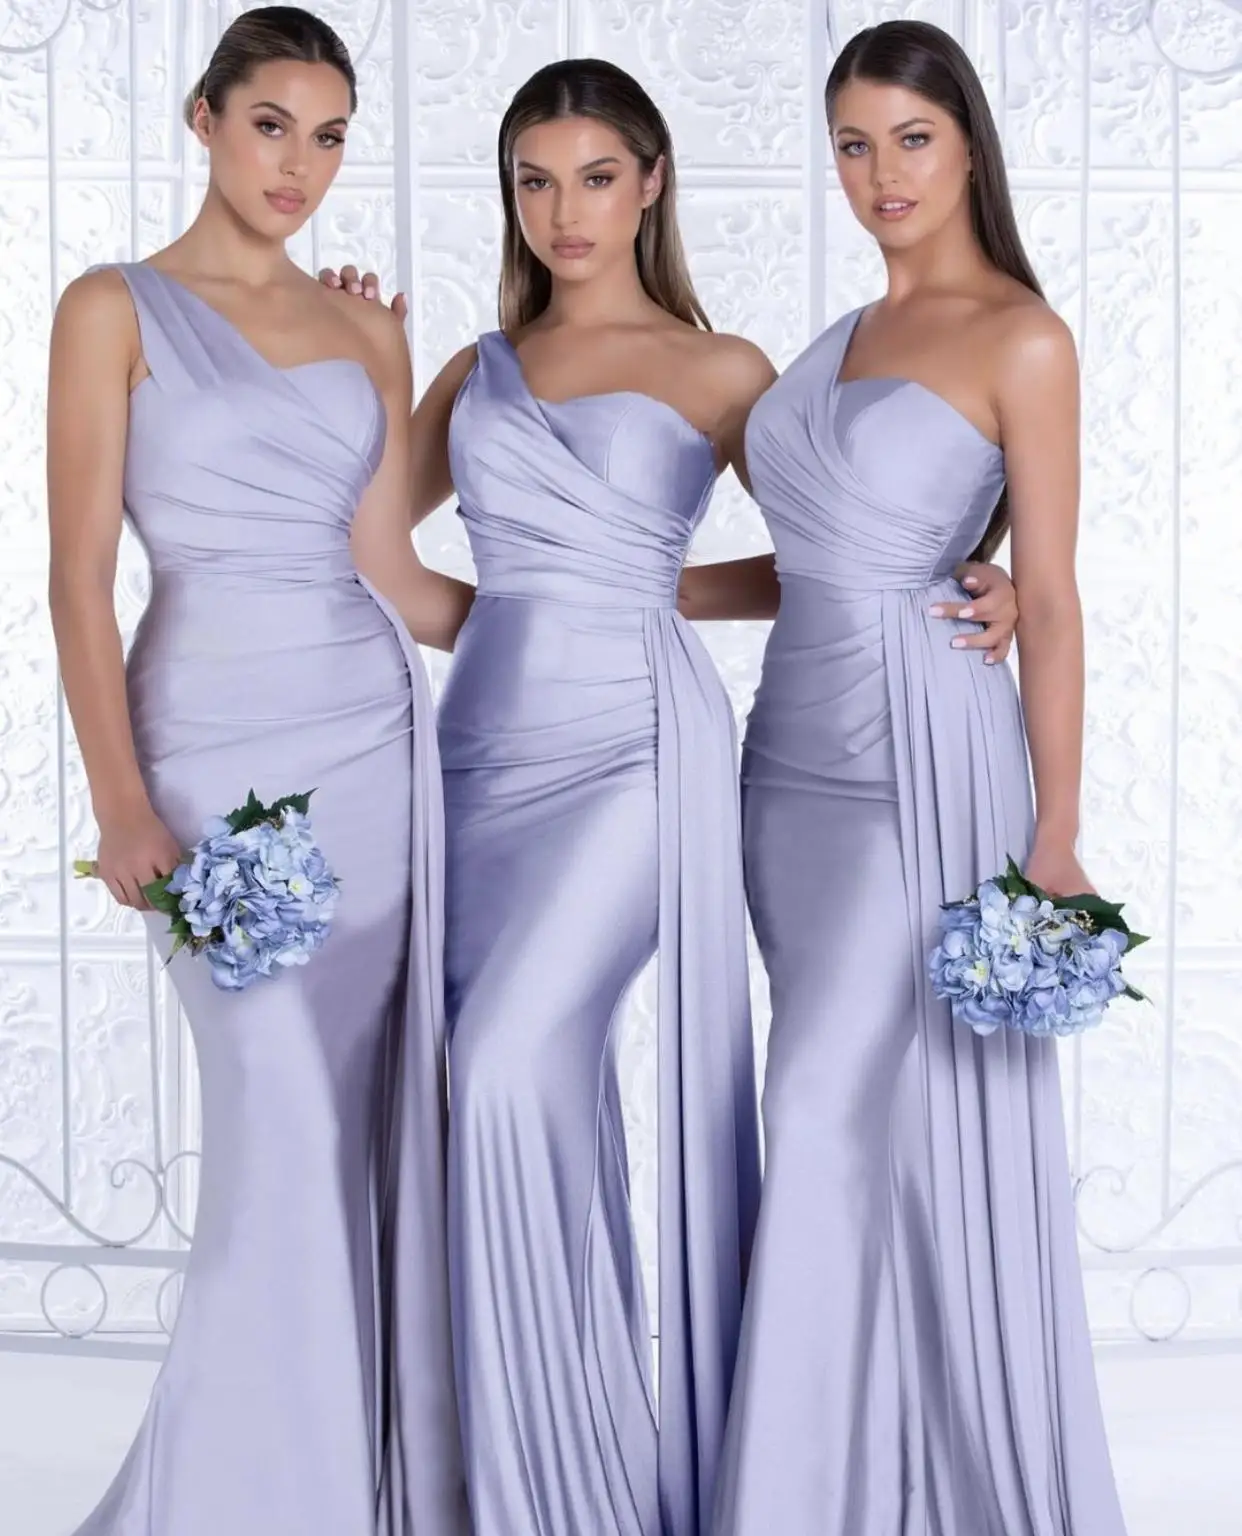 

Lilac African One Shoulder Mermaid Bridesmaid Dresses Plus Size Wedding Guest Gowns Junior Maid Of Honor Dress Ribbon